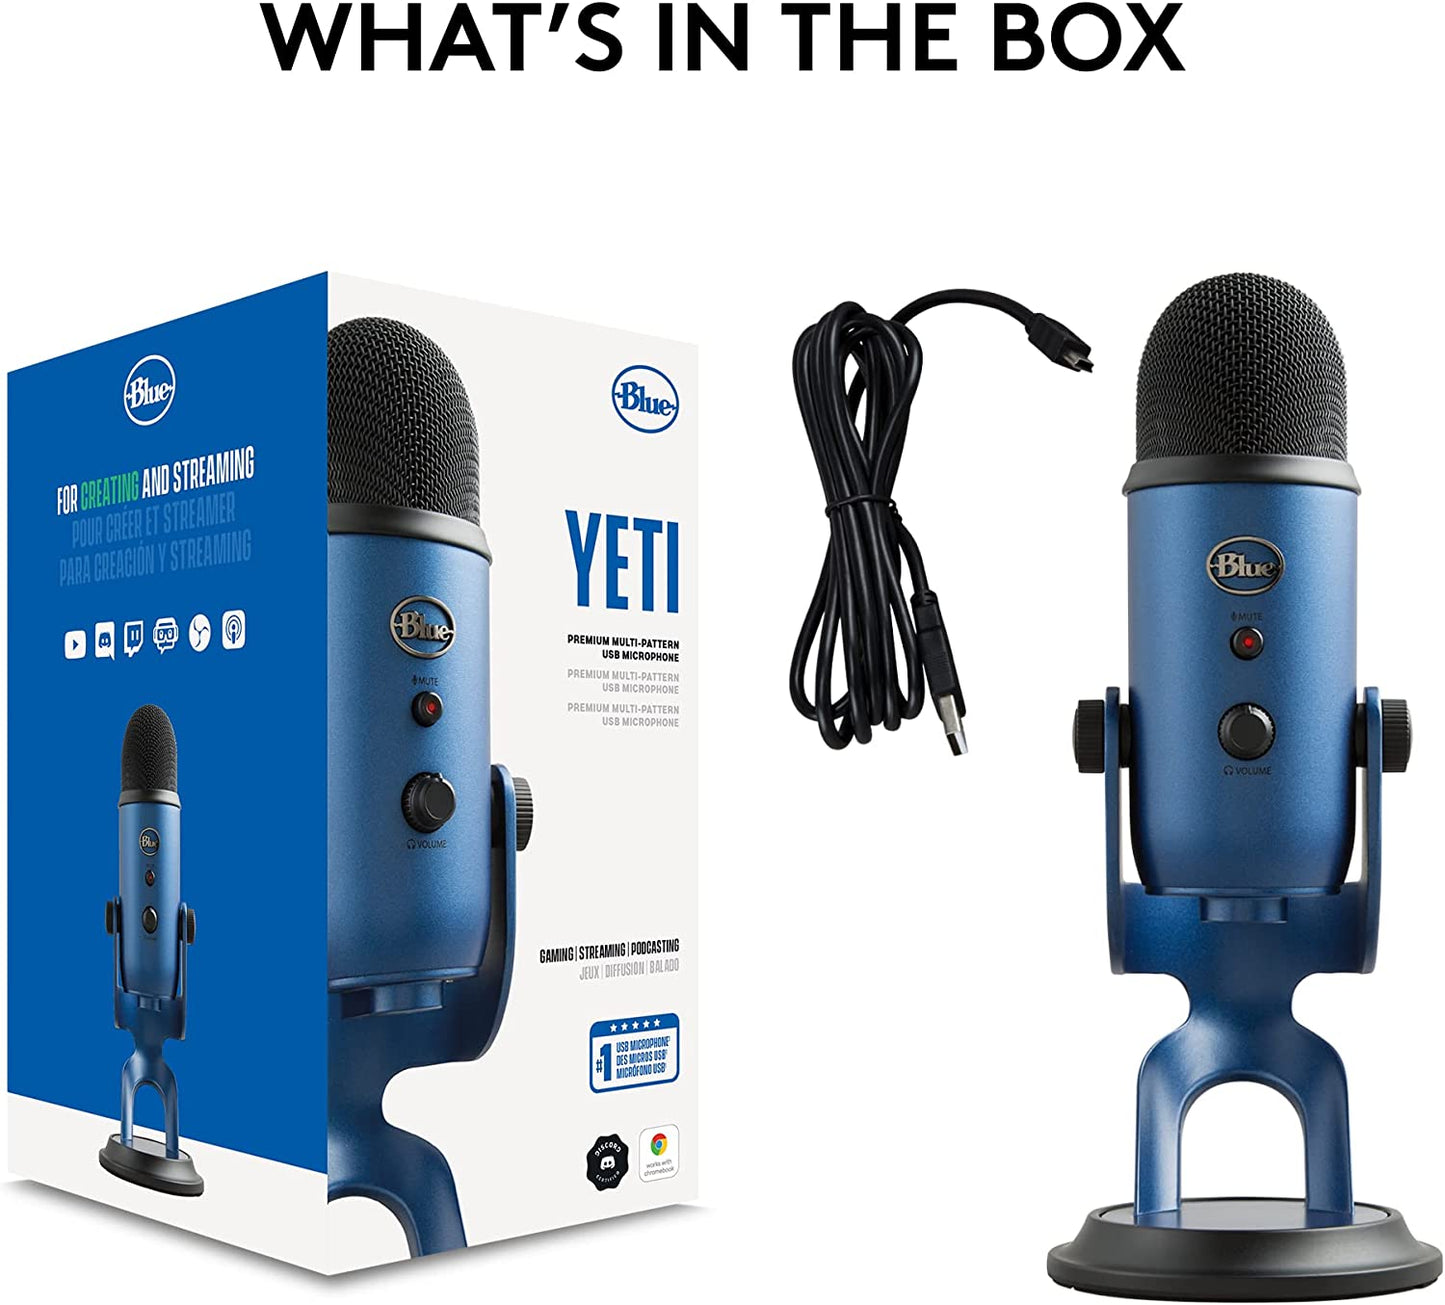 Yeti USB Mic for Recording and Streaming on PC and Mac,  VO!CE Effects, 4 Pickup Patterns, Headphone Output and Volume Control, Adjustable Stand, Plug and Play – Midnight